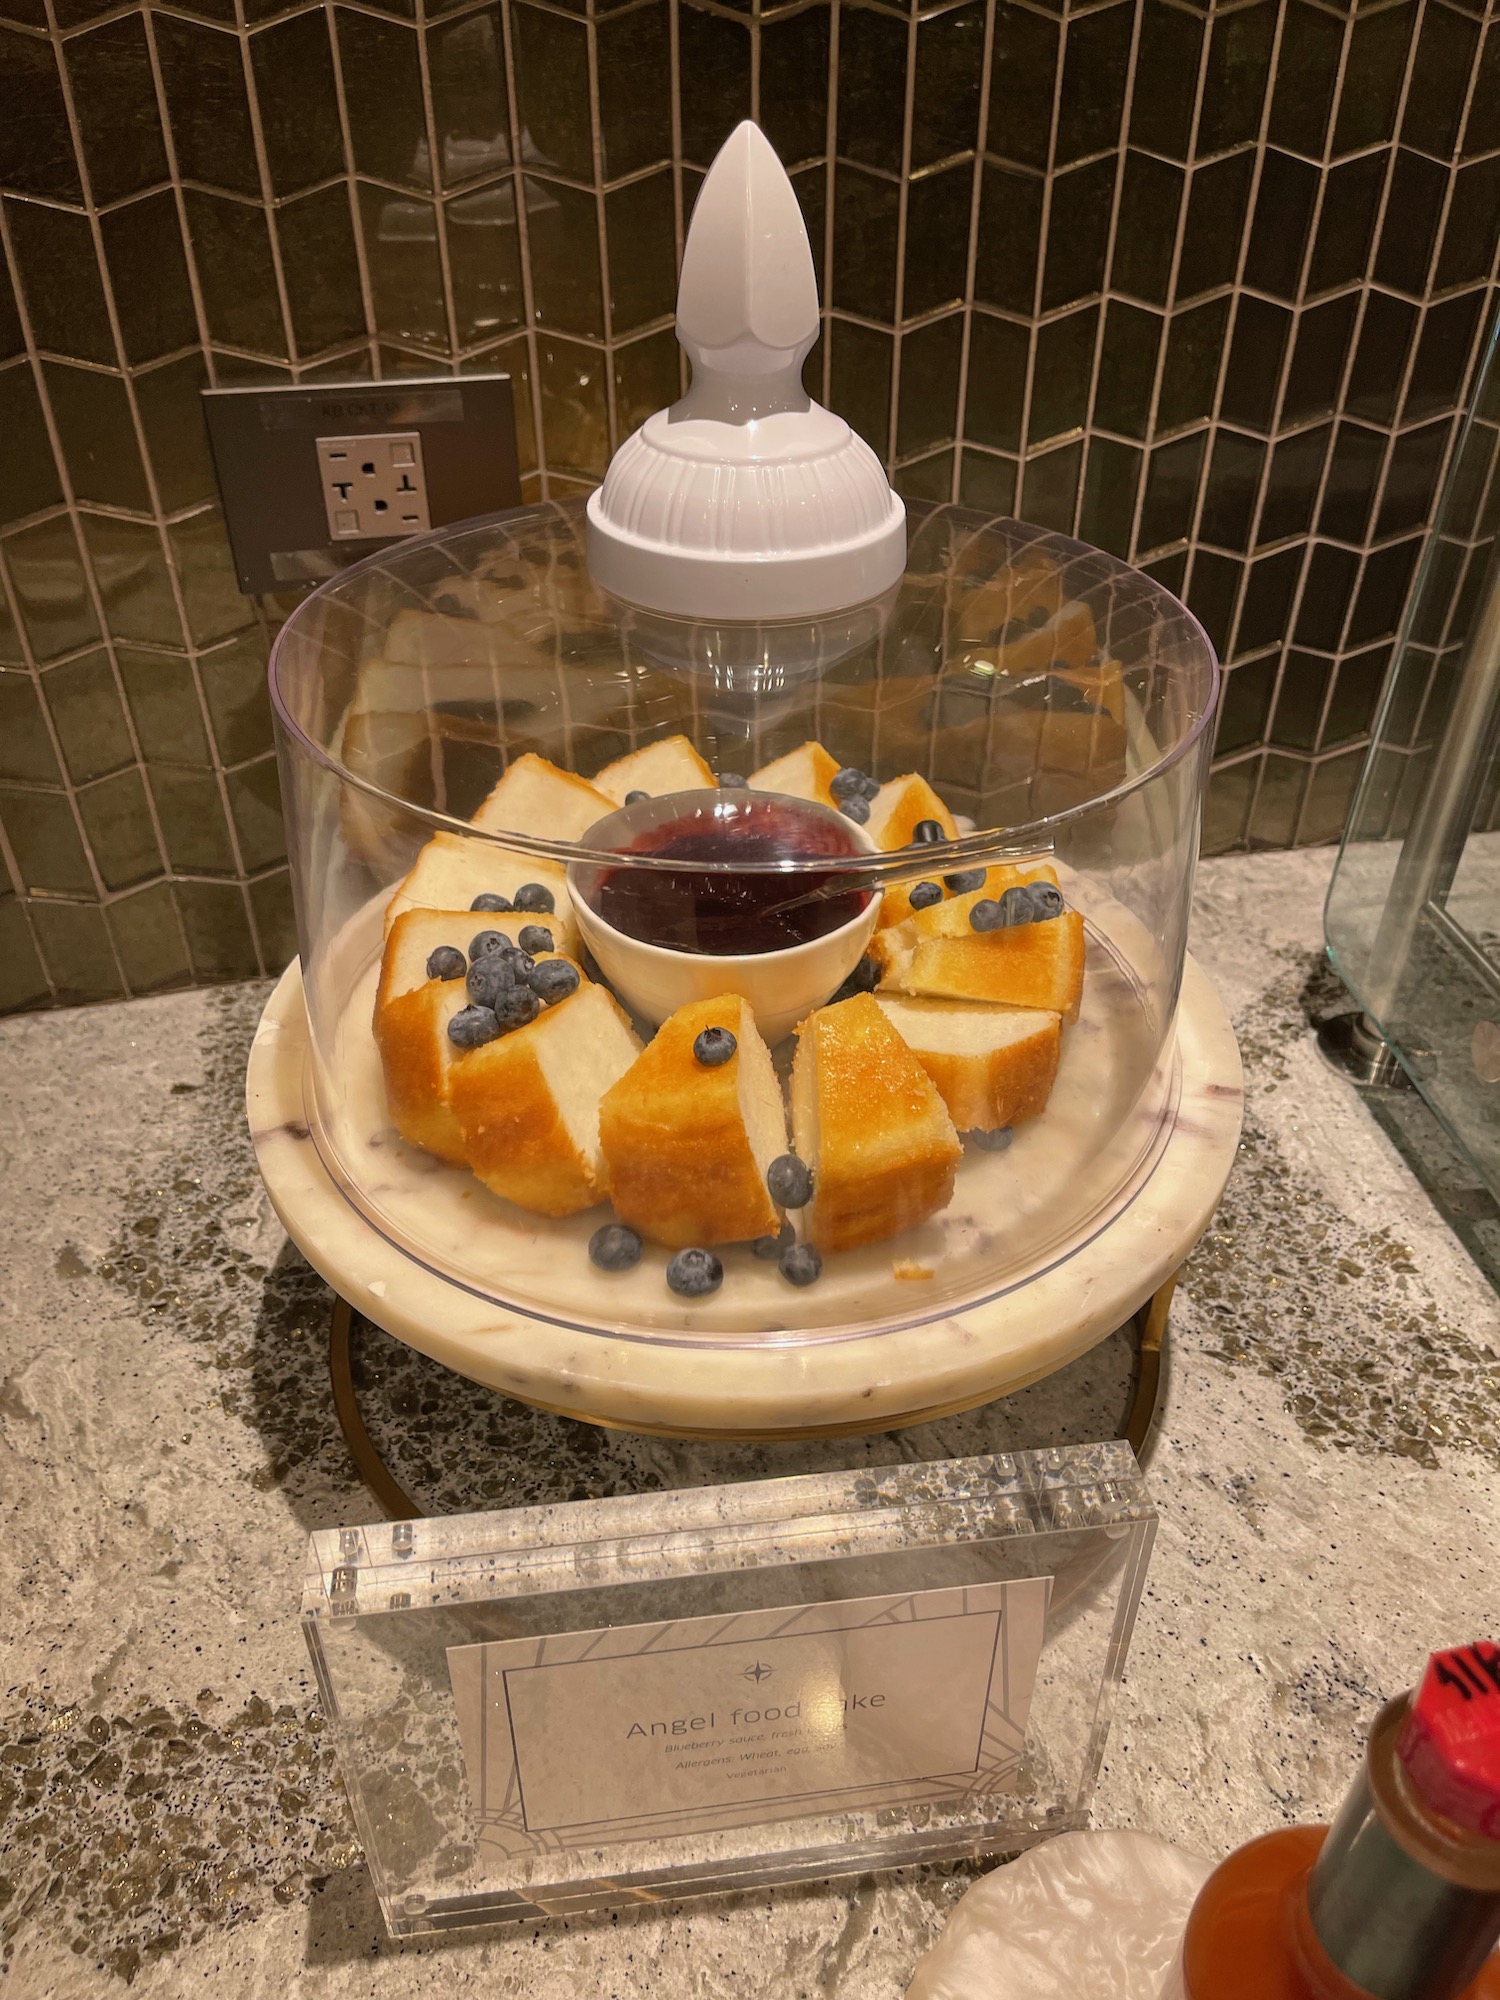 a plate of blueberries and bread with a glass dome